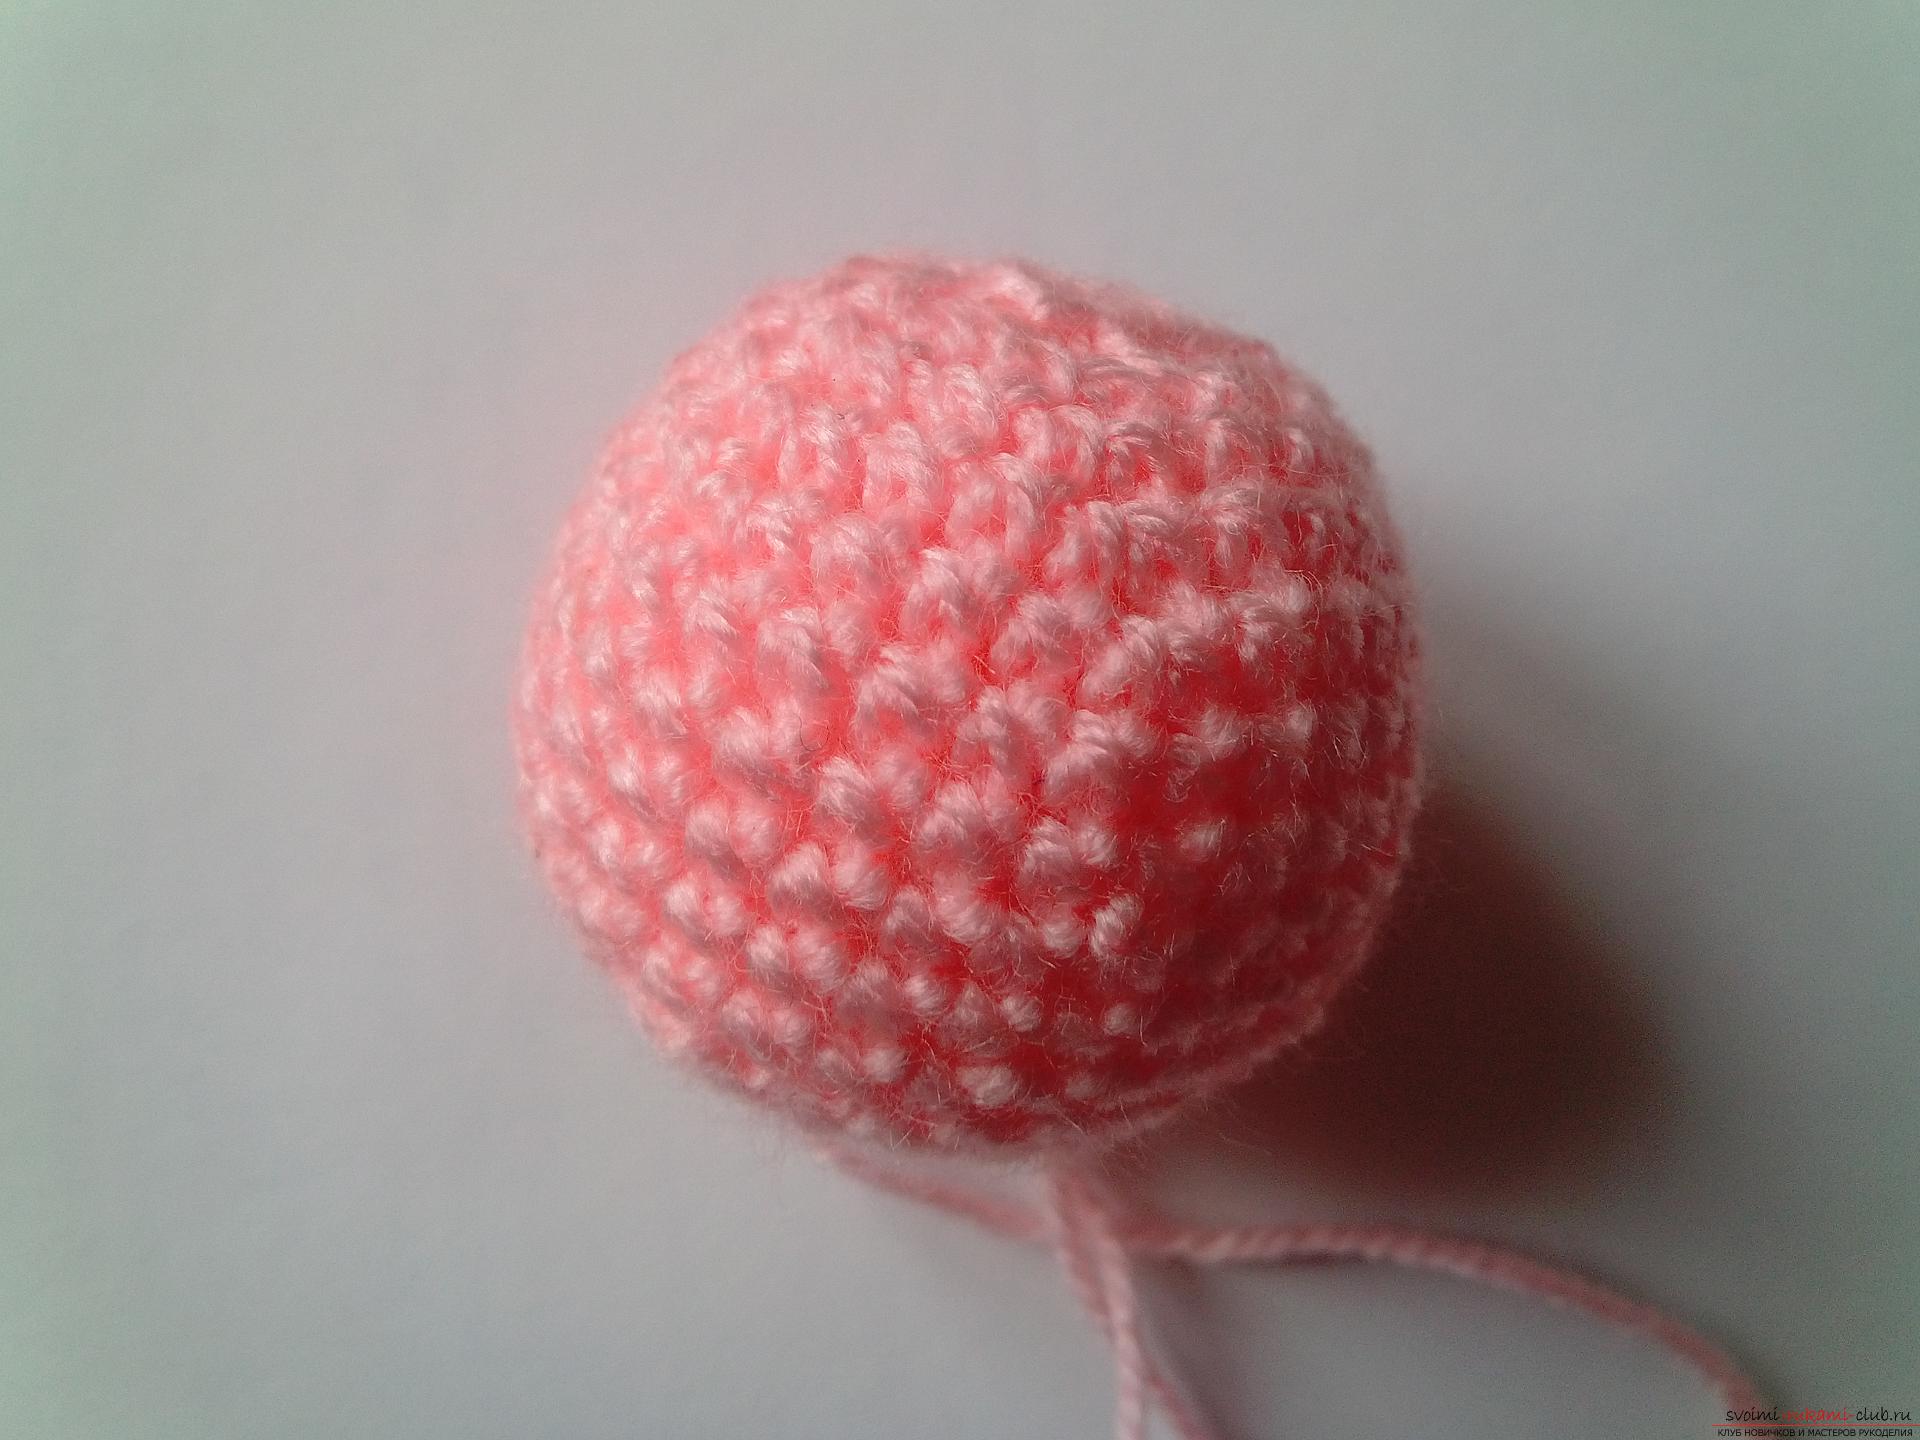 A master class with a photo and a step-by-step description will teach how to tie an amigurumi crochet toy. Photo # 2